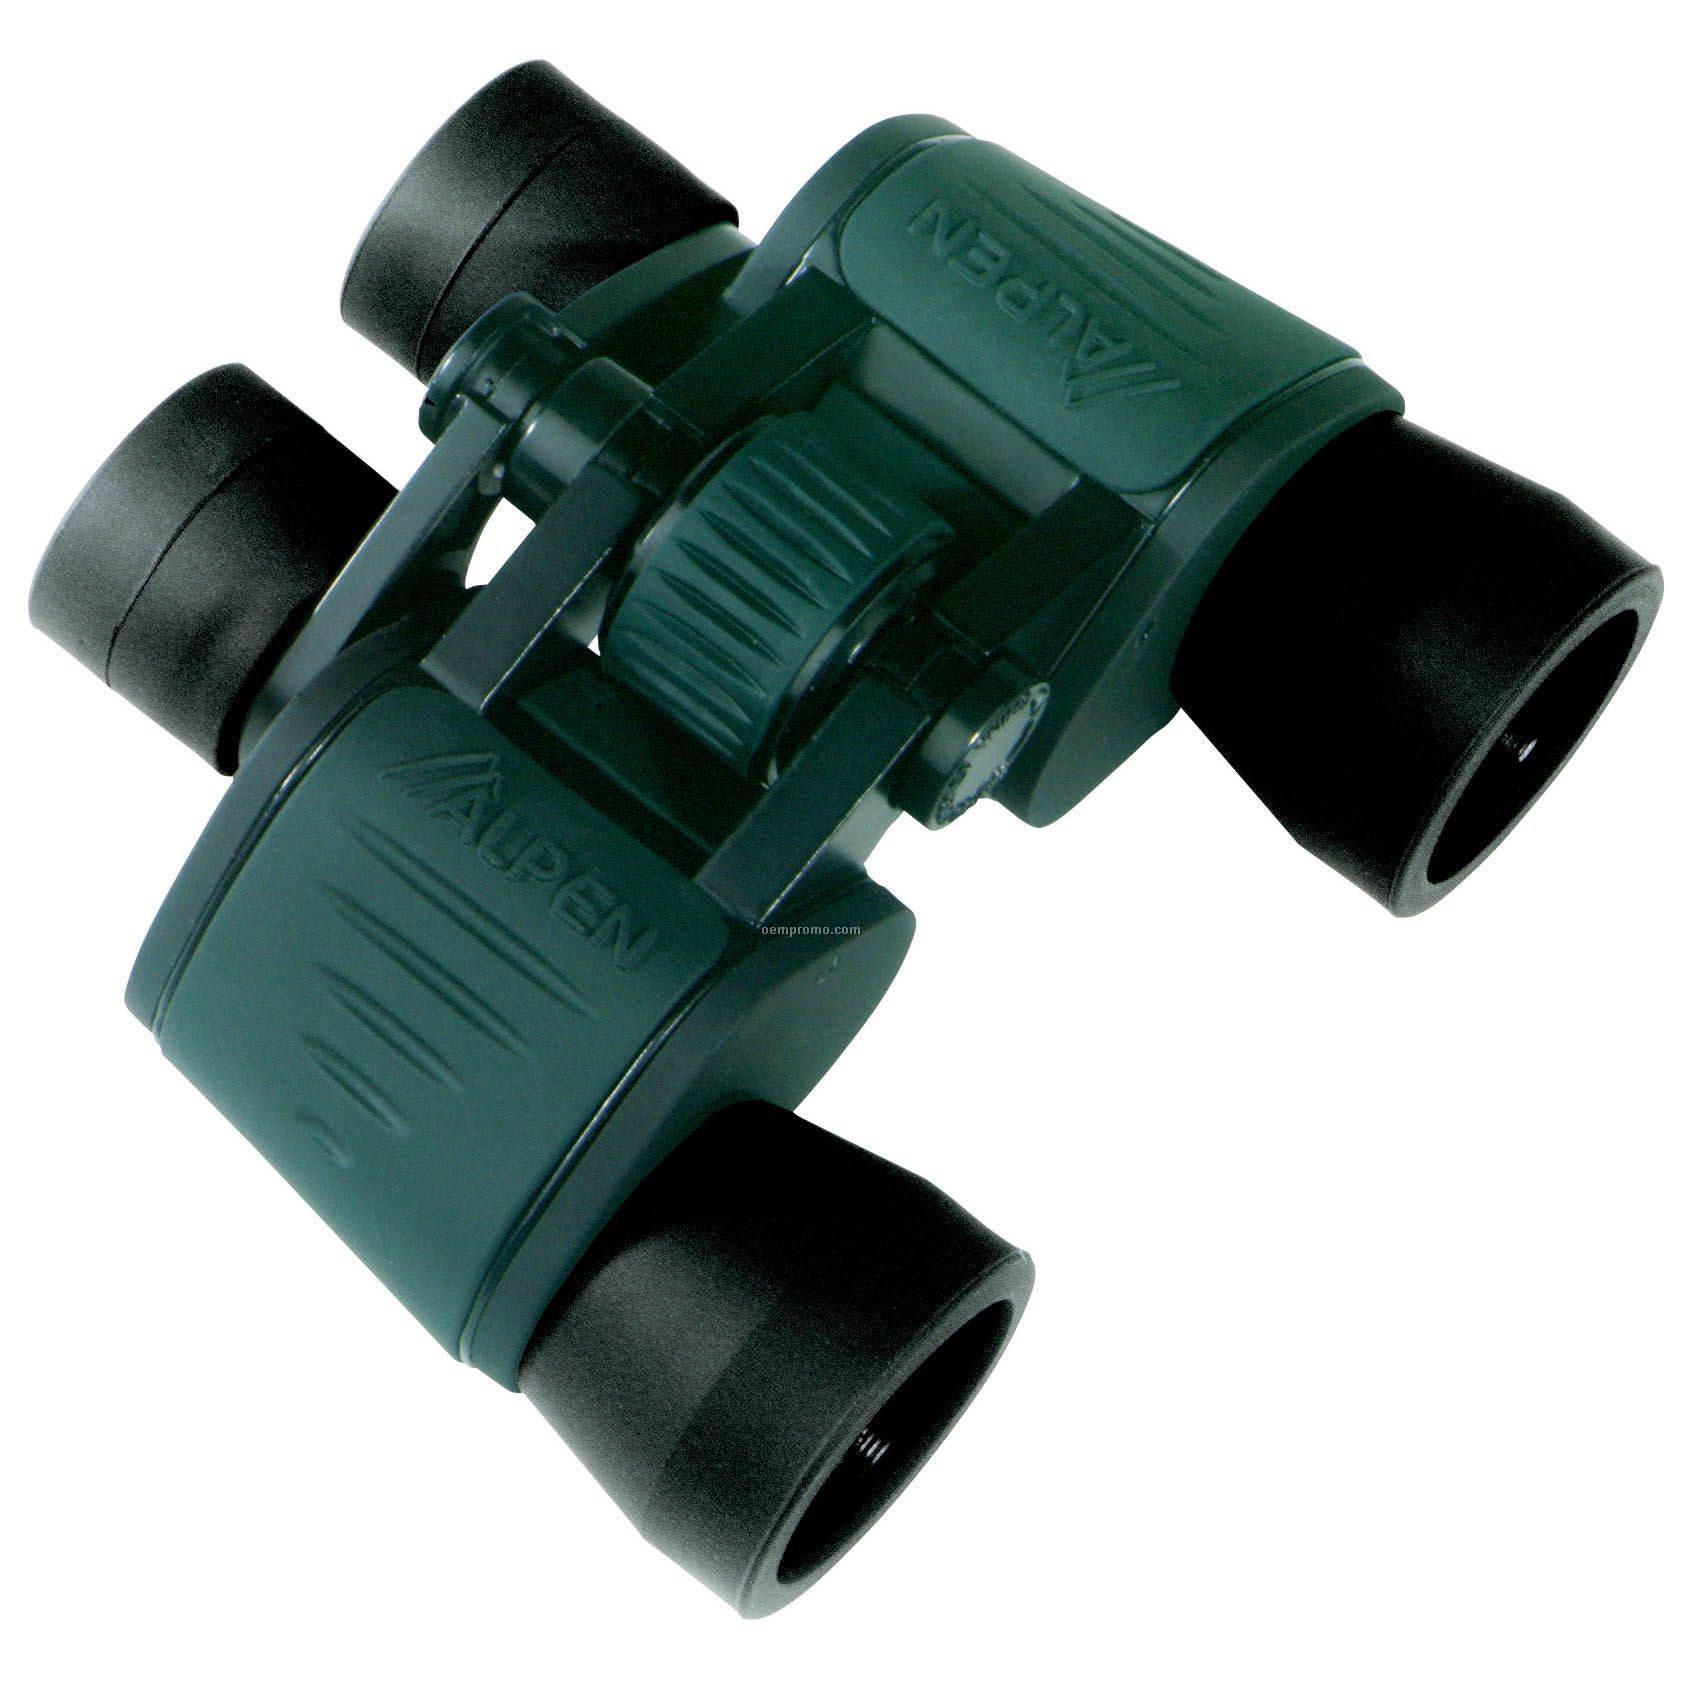 Alpen 8x40 Wide Angle Rubber Covered Binoculars